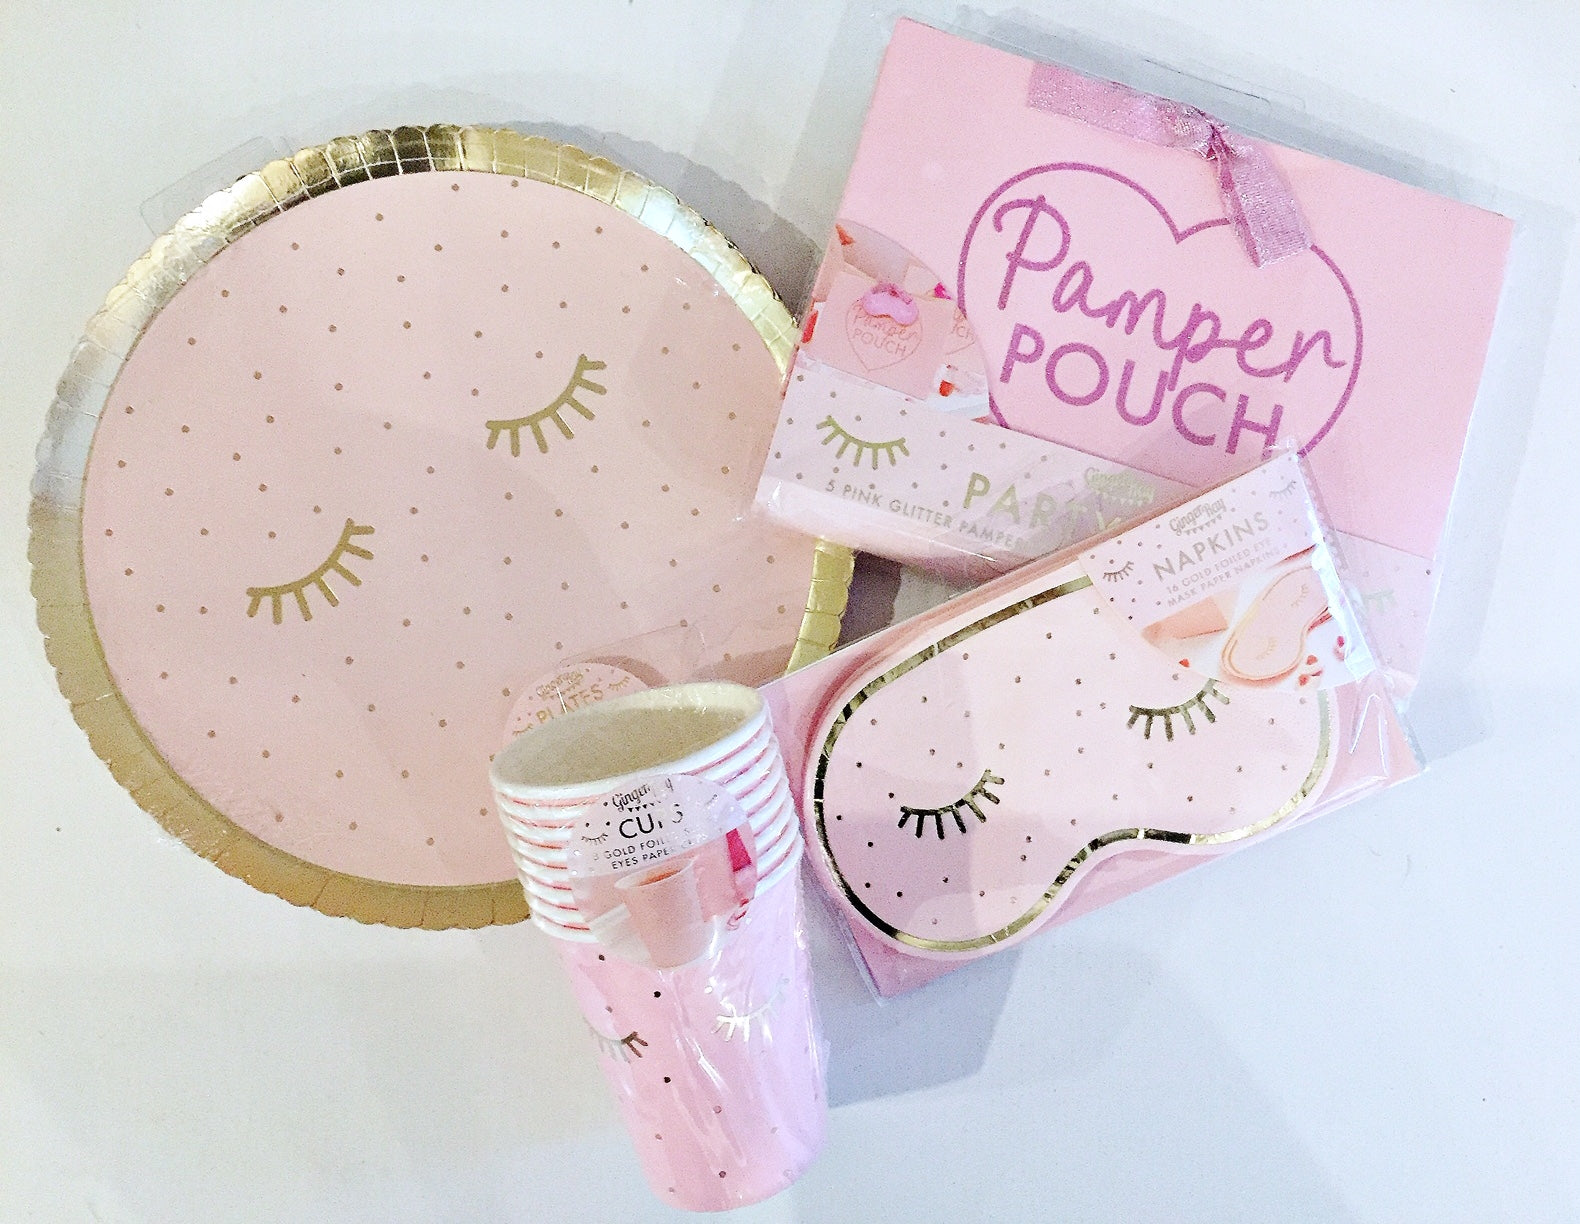 Pamper party supplies